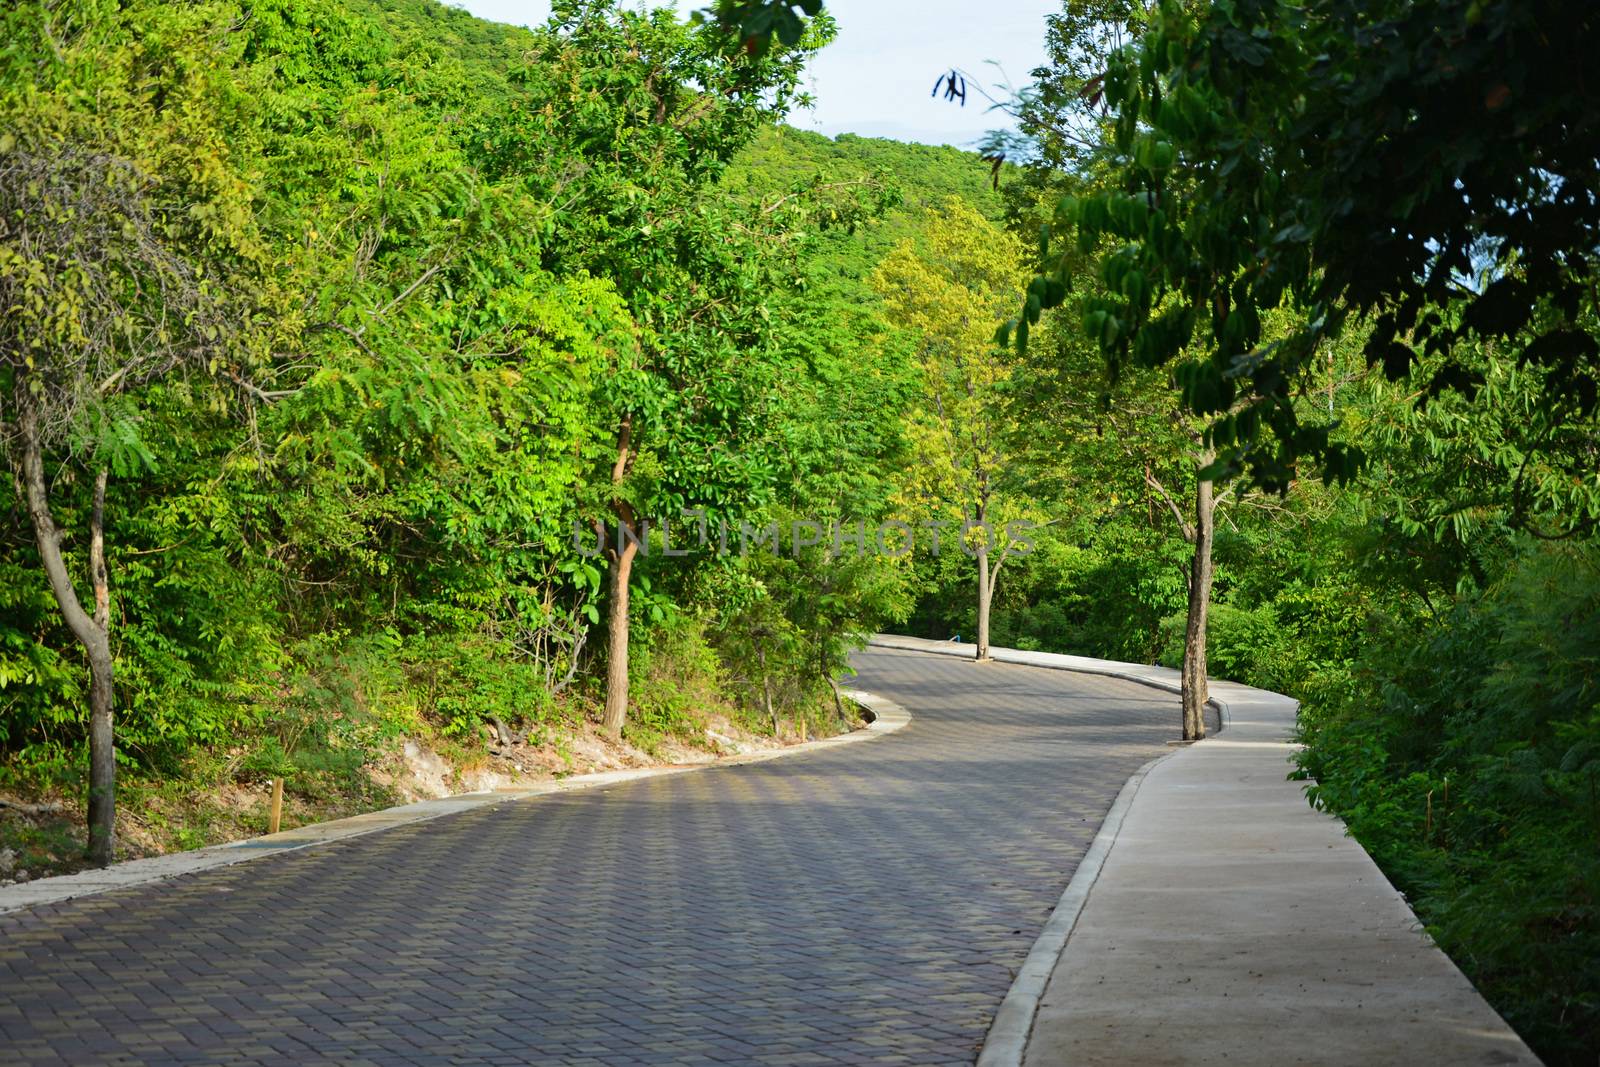 Road on Larn island in Pattaya city of Thailand by think4photop